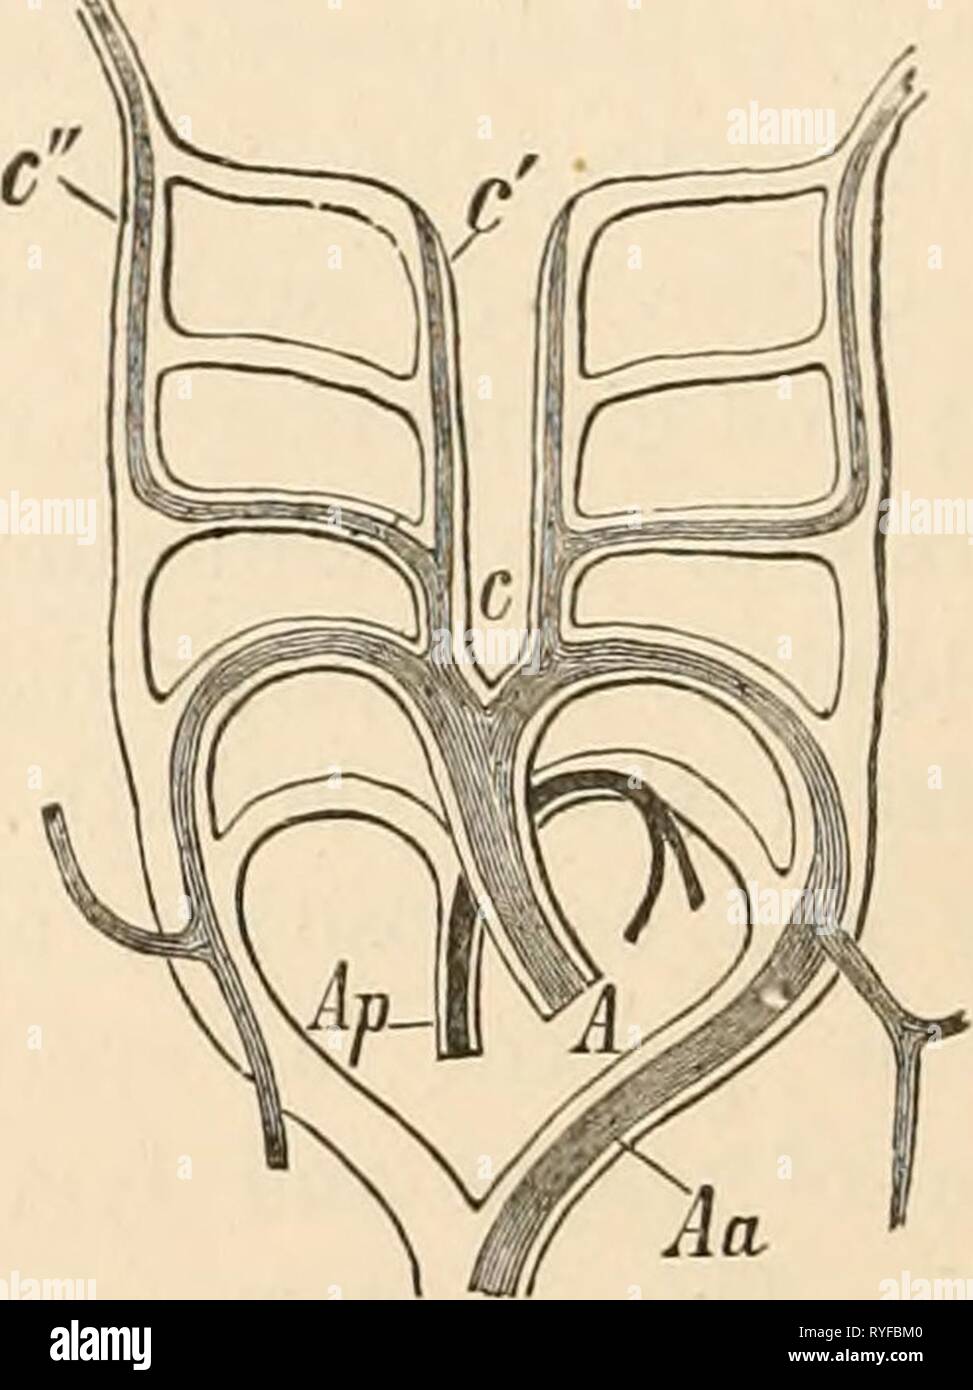 Elementary text-book of zoology  elementarytextbo0101clau Year: 1884    FIG. 62.— Diagram of the great arteries of a mammal with reference to the fira-embry- oiiic arterial arches (after Rathke). c, common carotids ; c', external carotid ; c', inter- nal carotid; A, aorta. Ap, pulmonary artery ; Aa, aortic arch. Inner surfaces also may be con- cerned in this exchange, especially those of the digestive cavity and intestine, or, as in the Echi- noderms, in which a separate vascular system is developed, the surface of the whole body cavity. Respiration in water obviously takes place under far mor Stock Photo